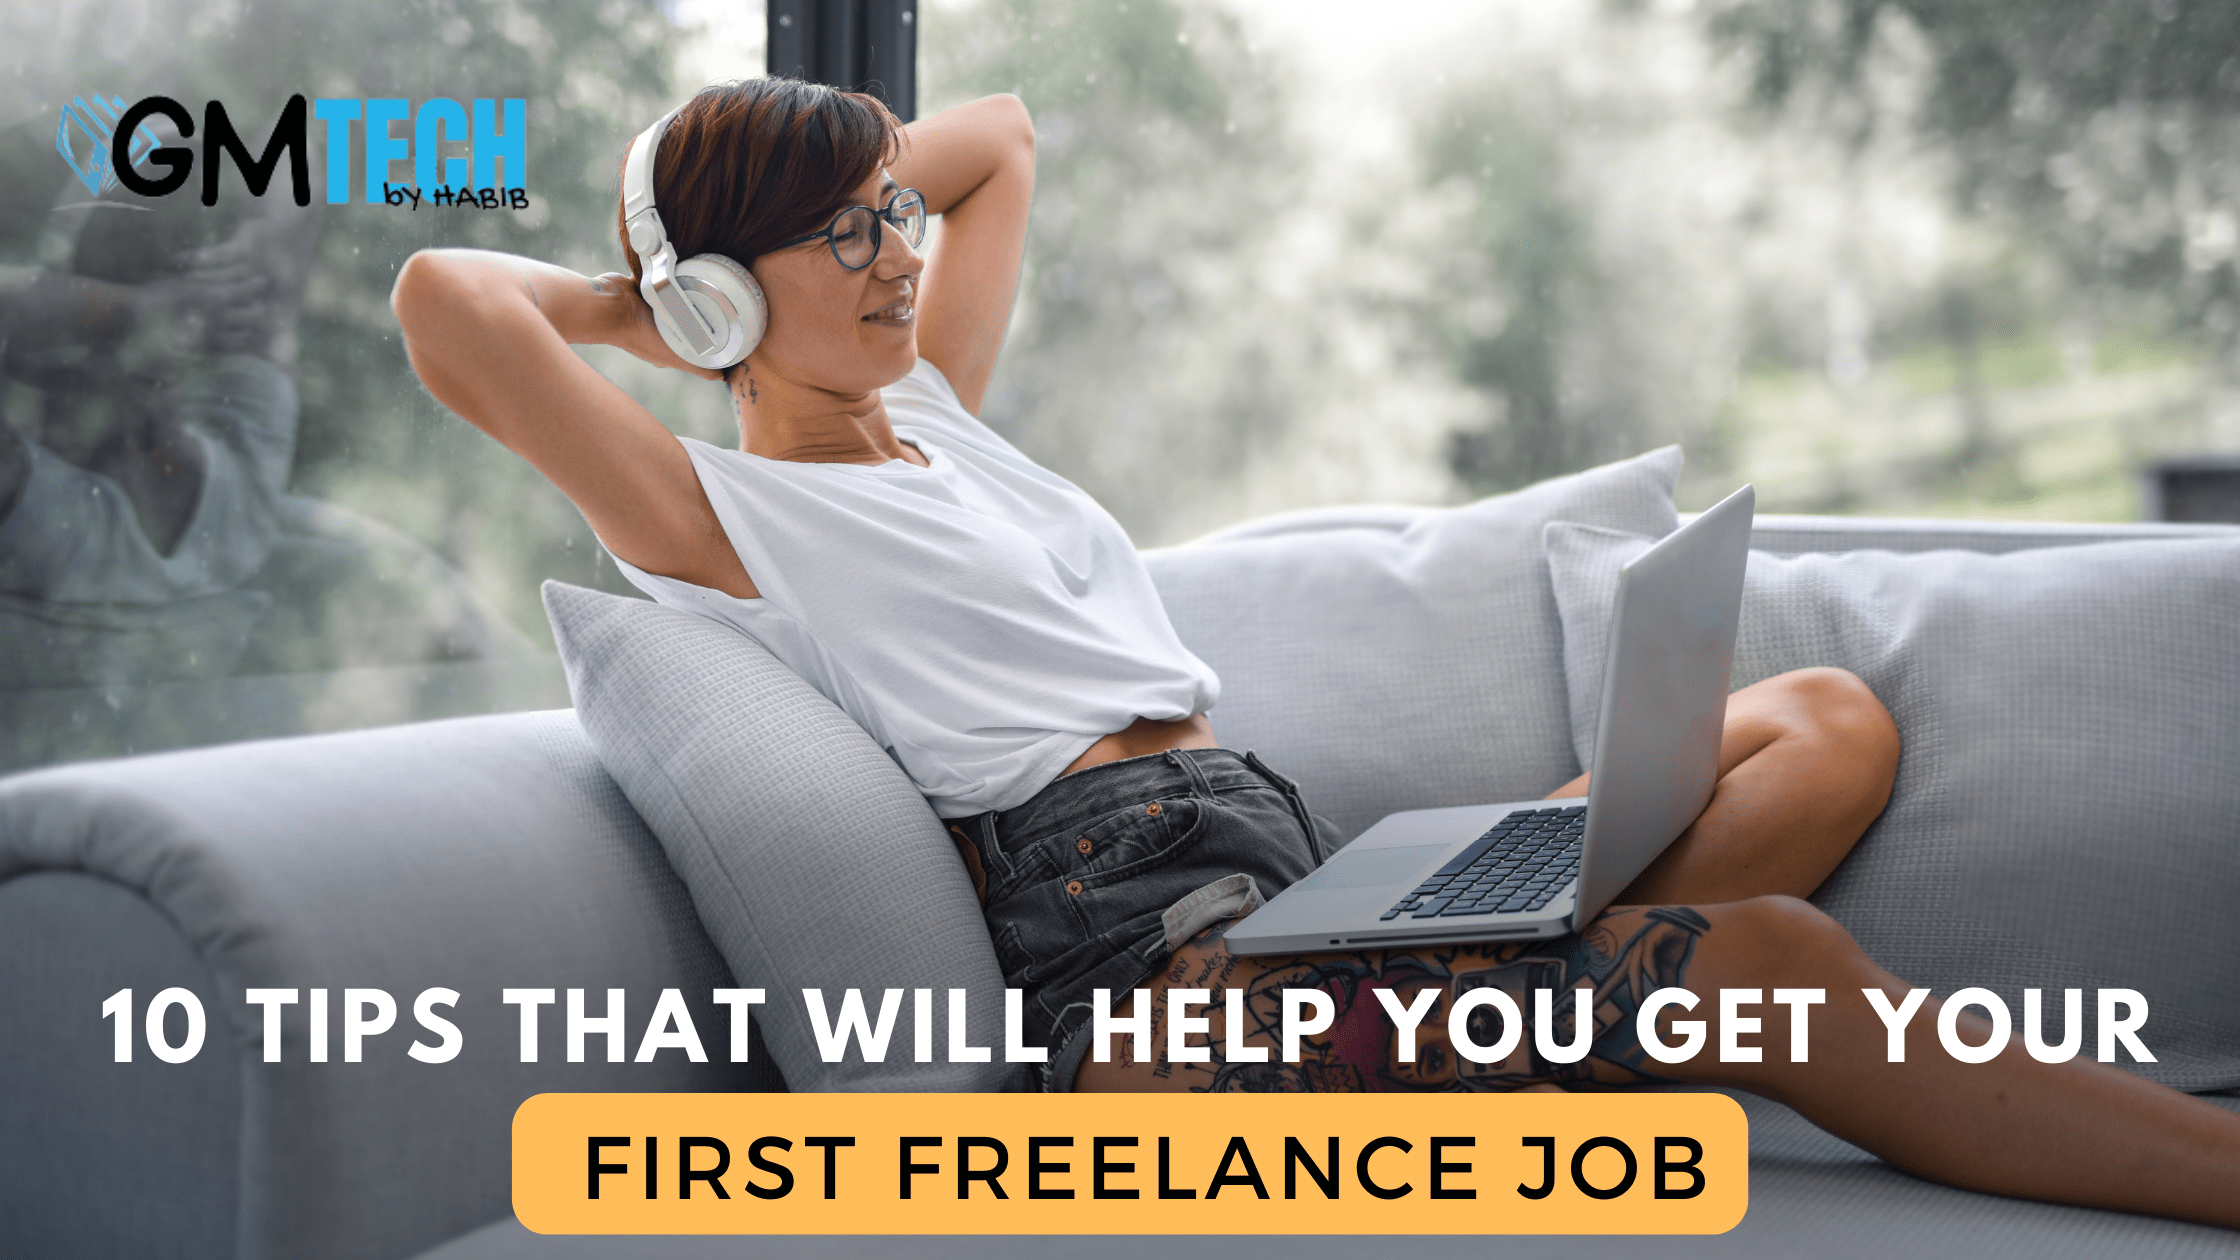 10 Tips That Will Help You Get Your First Freelance Job